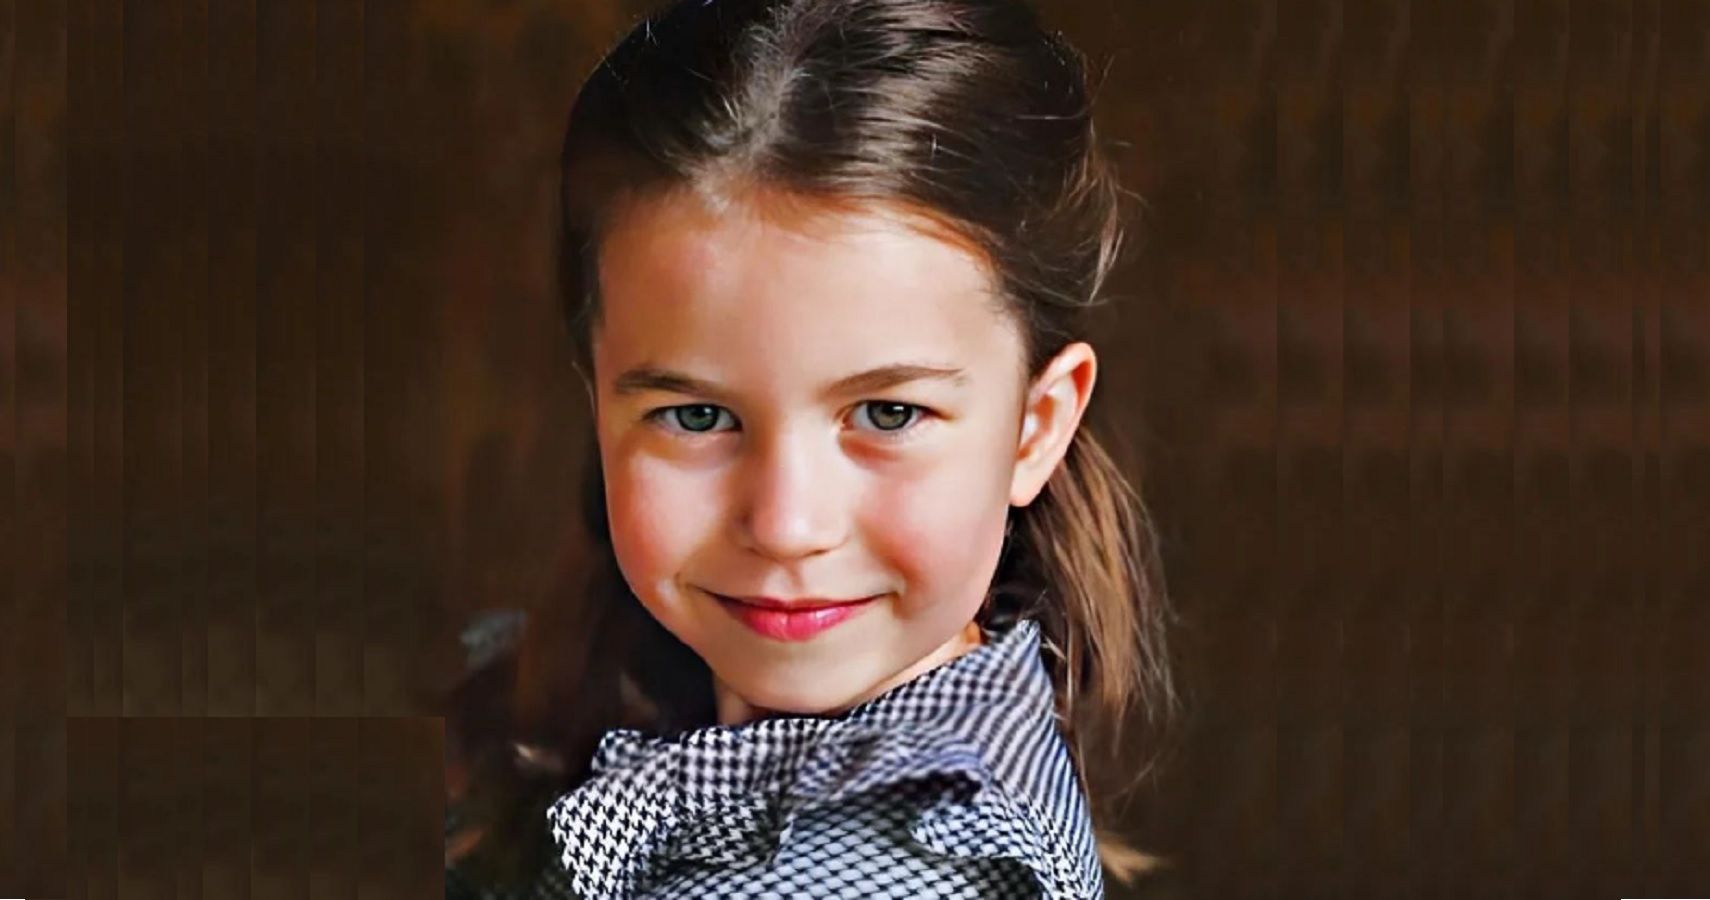 The Richest Kid In The World: Inside The Lavish Life Of Princess Charlotte Of Cambridge